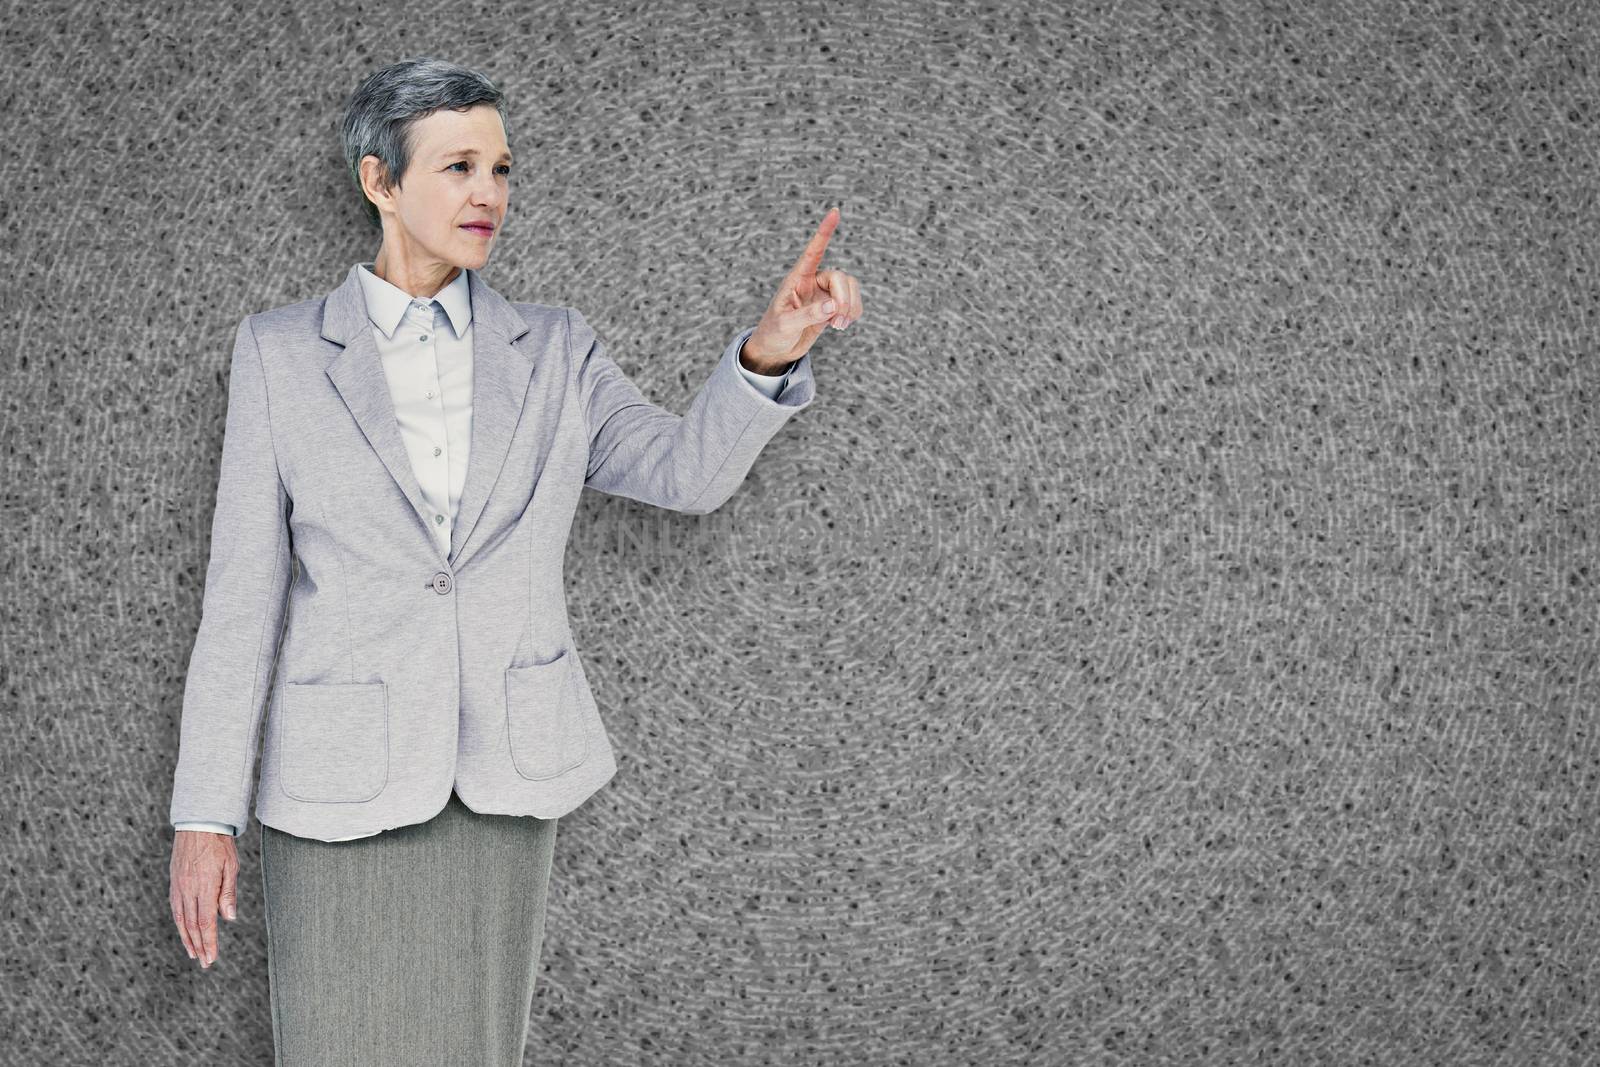 Businesswoman pointing against grey background